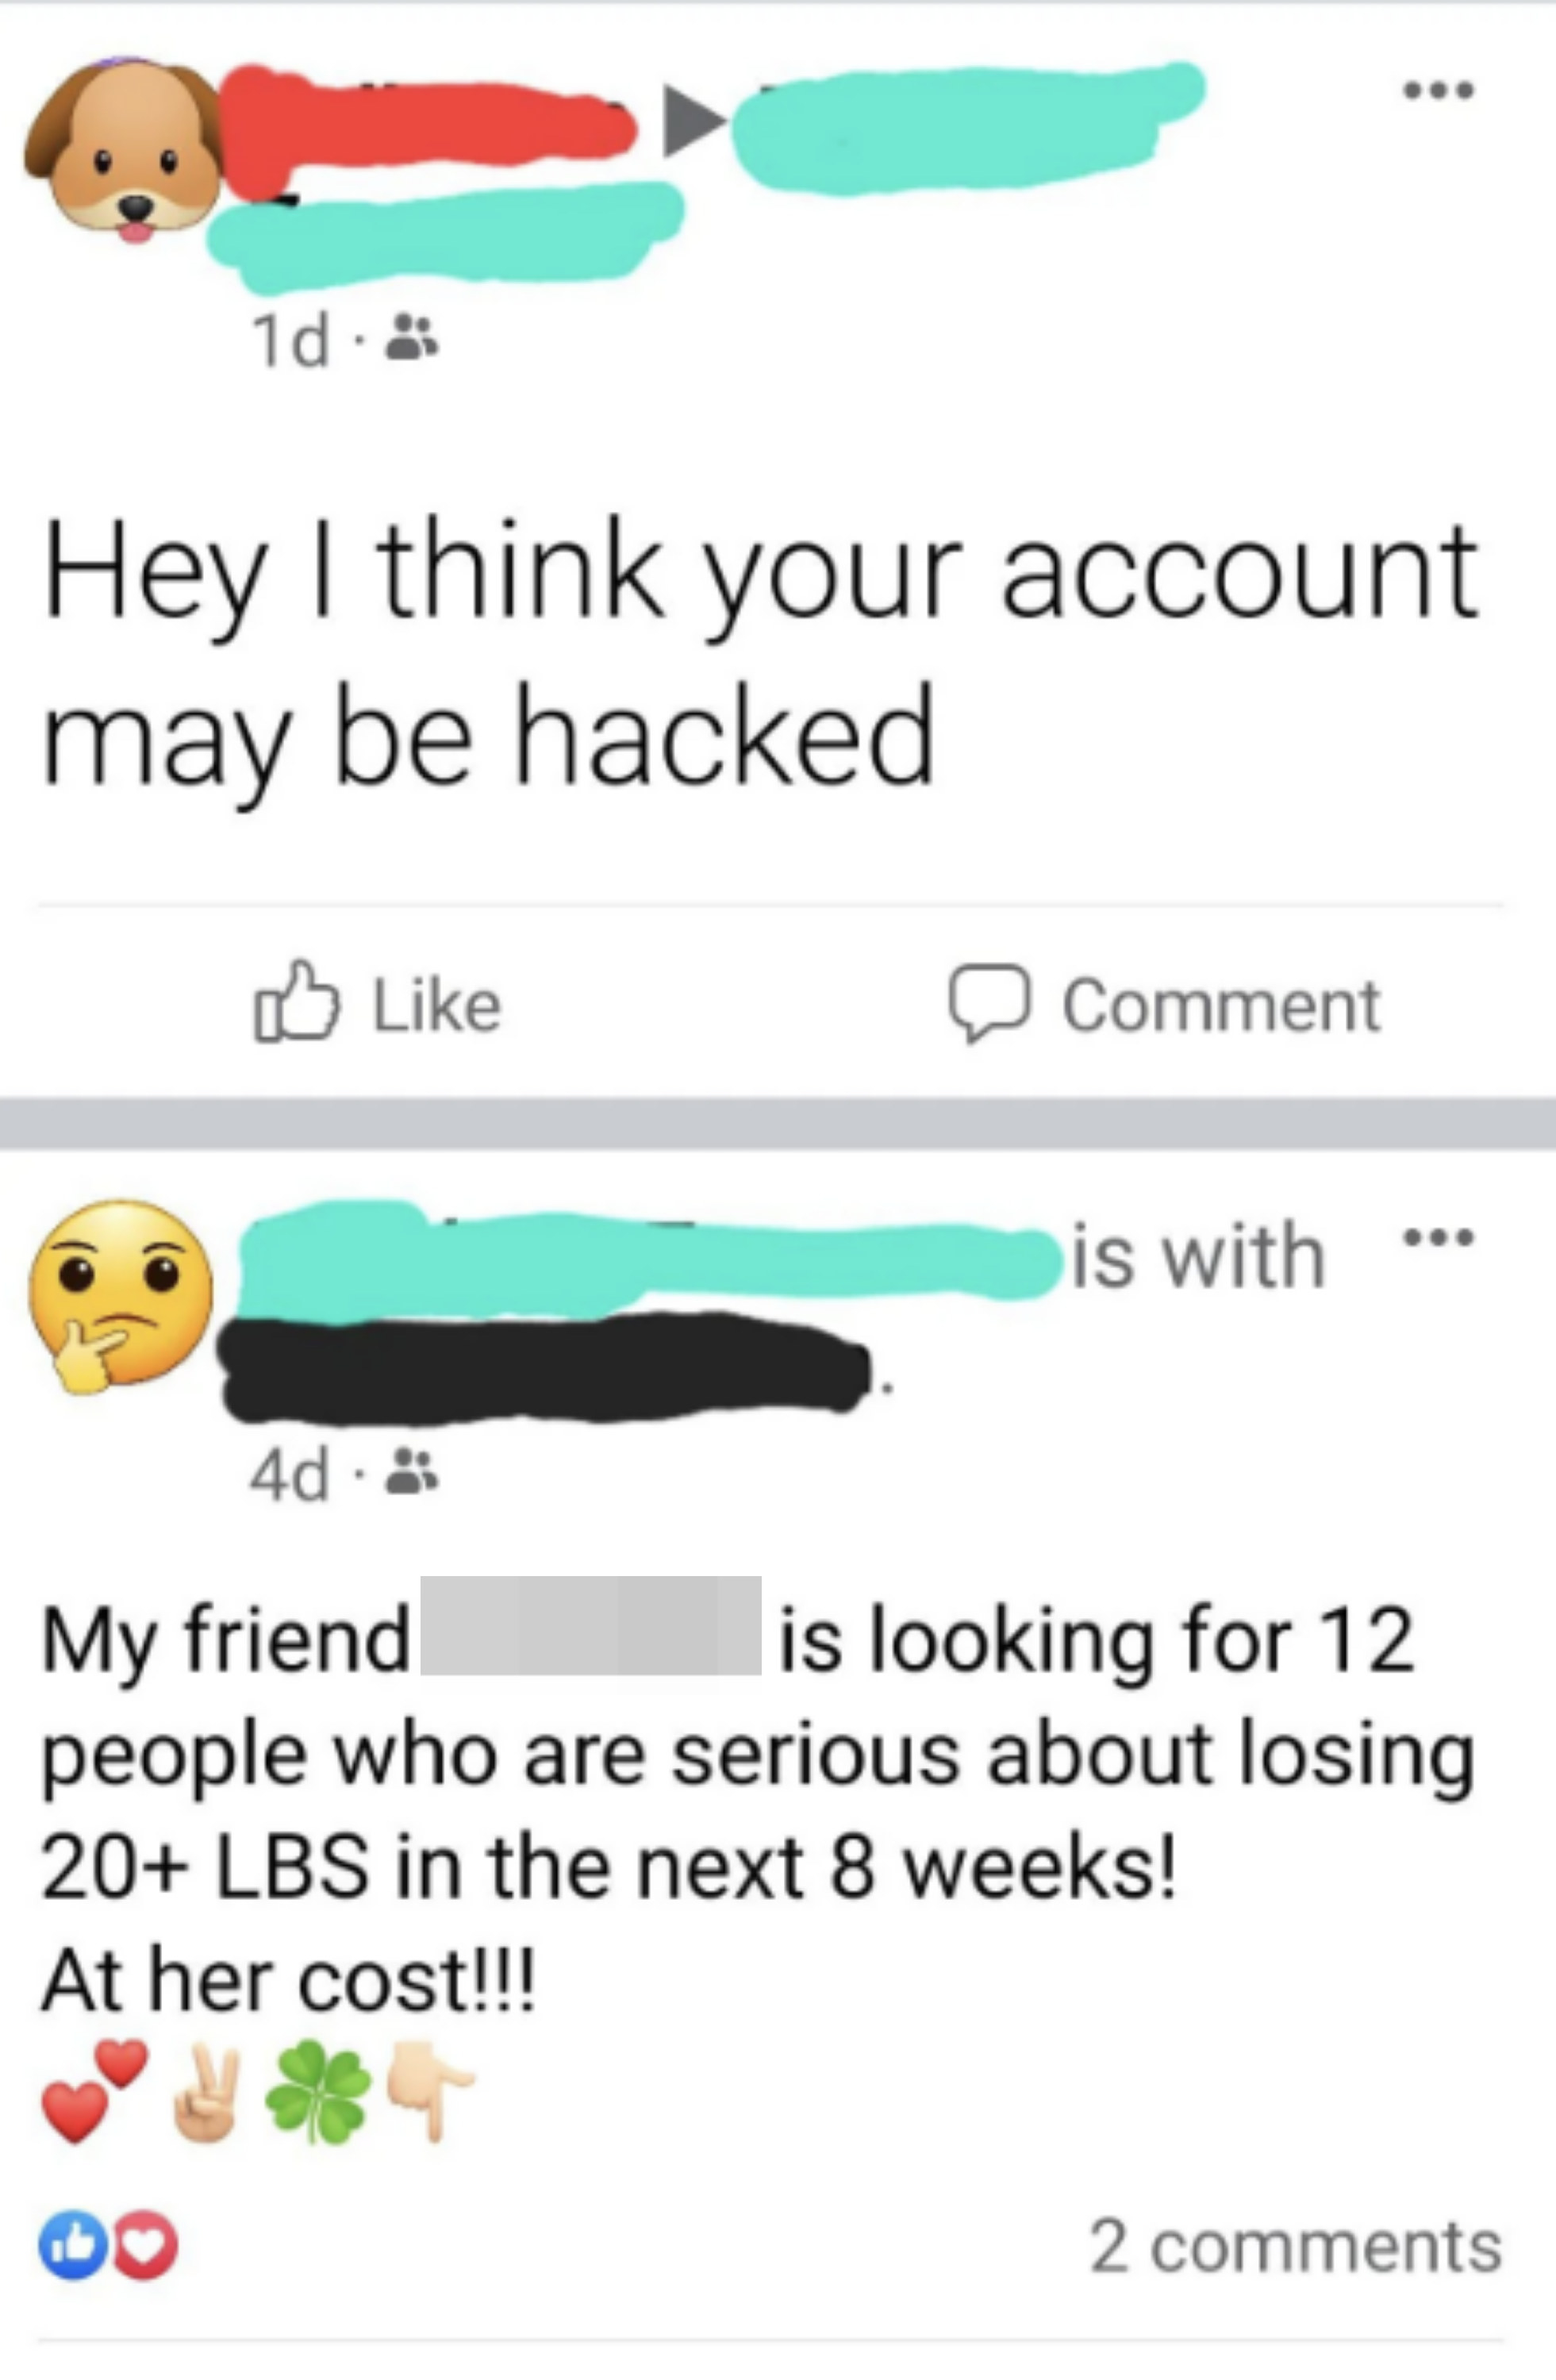 &quot;Hey I think your account may be hacked&quot;